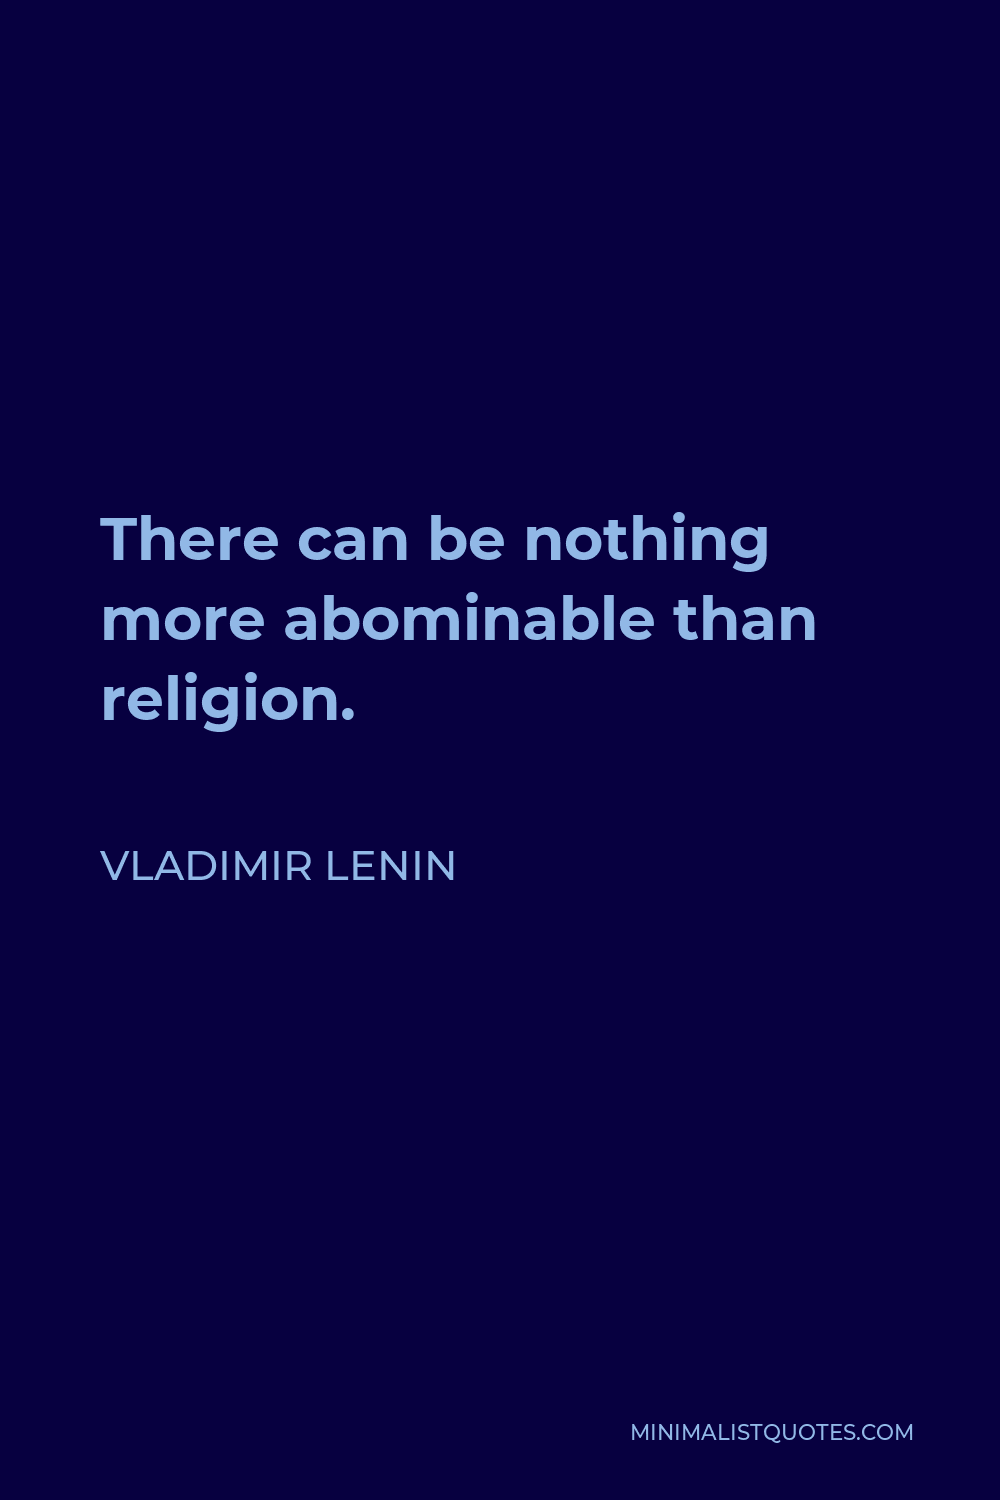 Vladimir Lenin Quote - There can be nothing more abominable than religion.